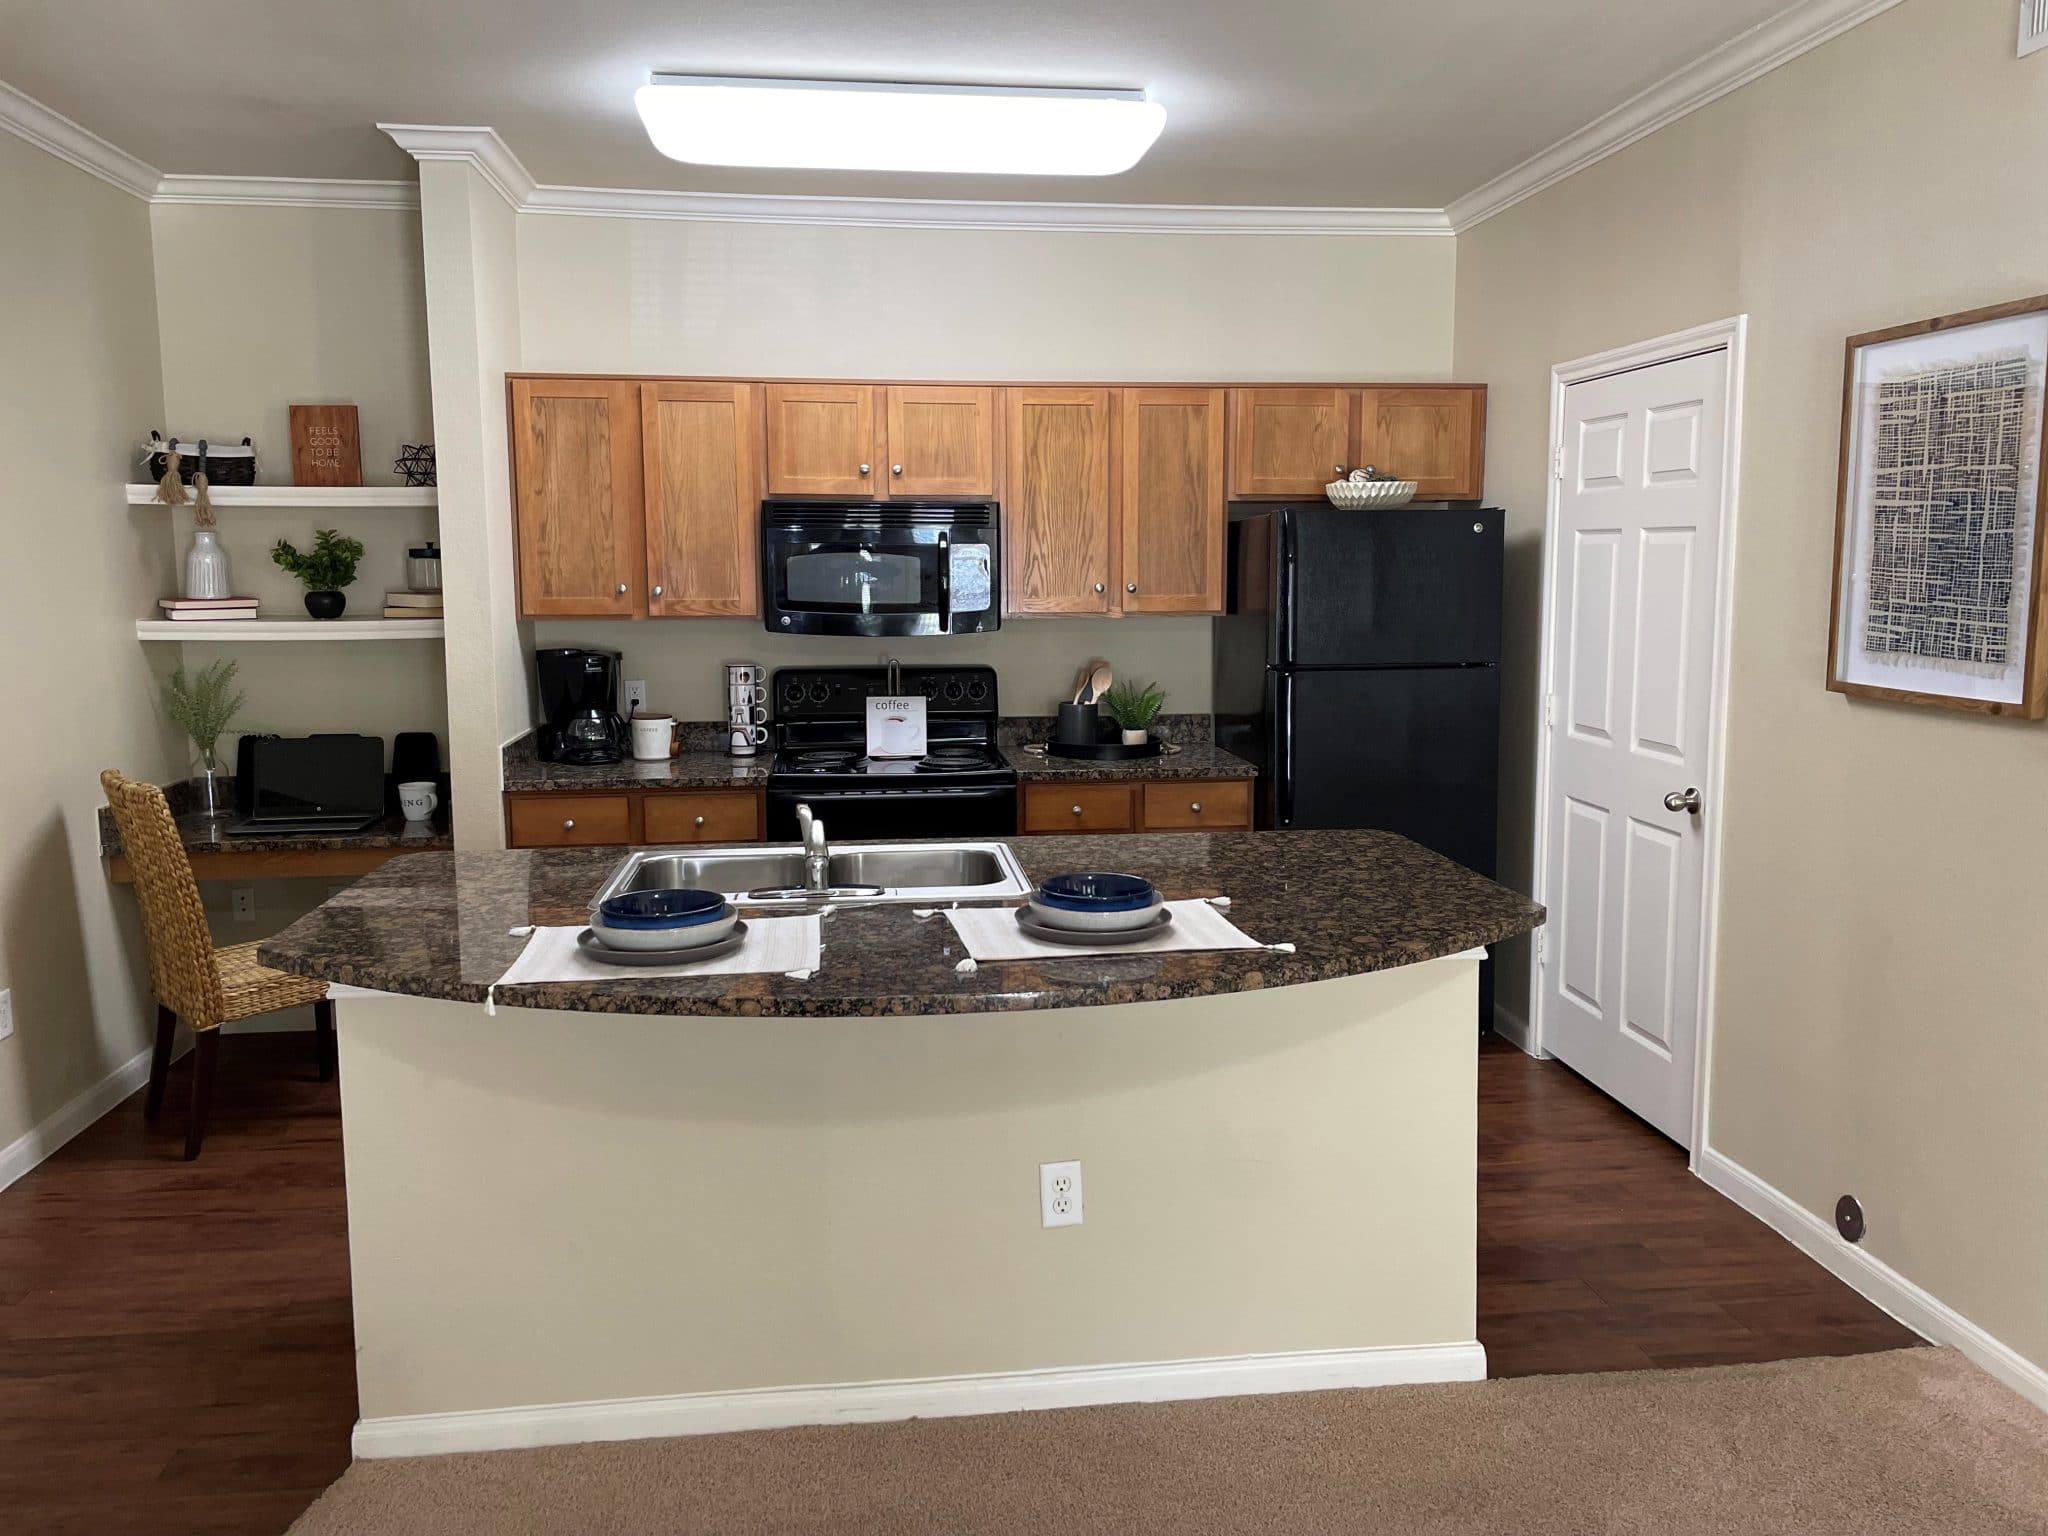 Two Bedroom Apartments in San Antonio, Texas - Model Apartment Kitchen with Breakfast Bar